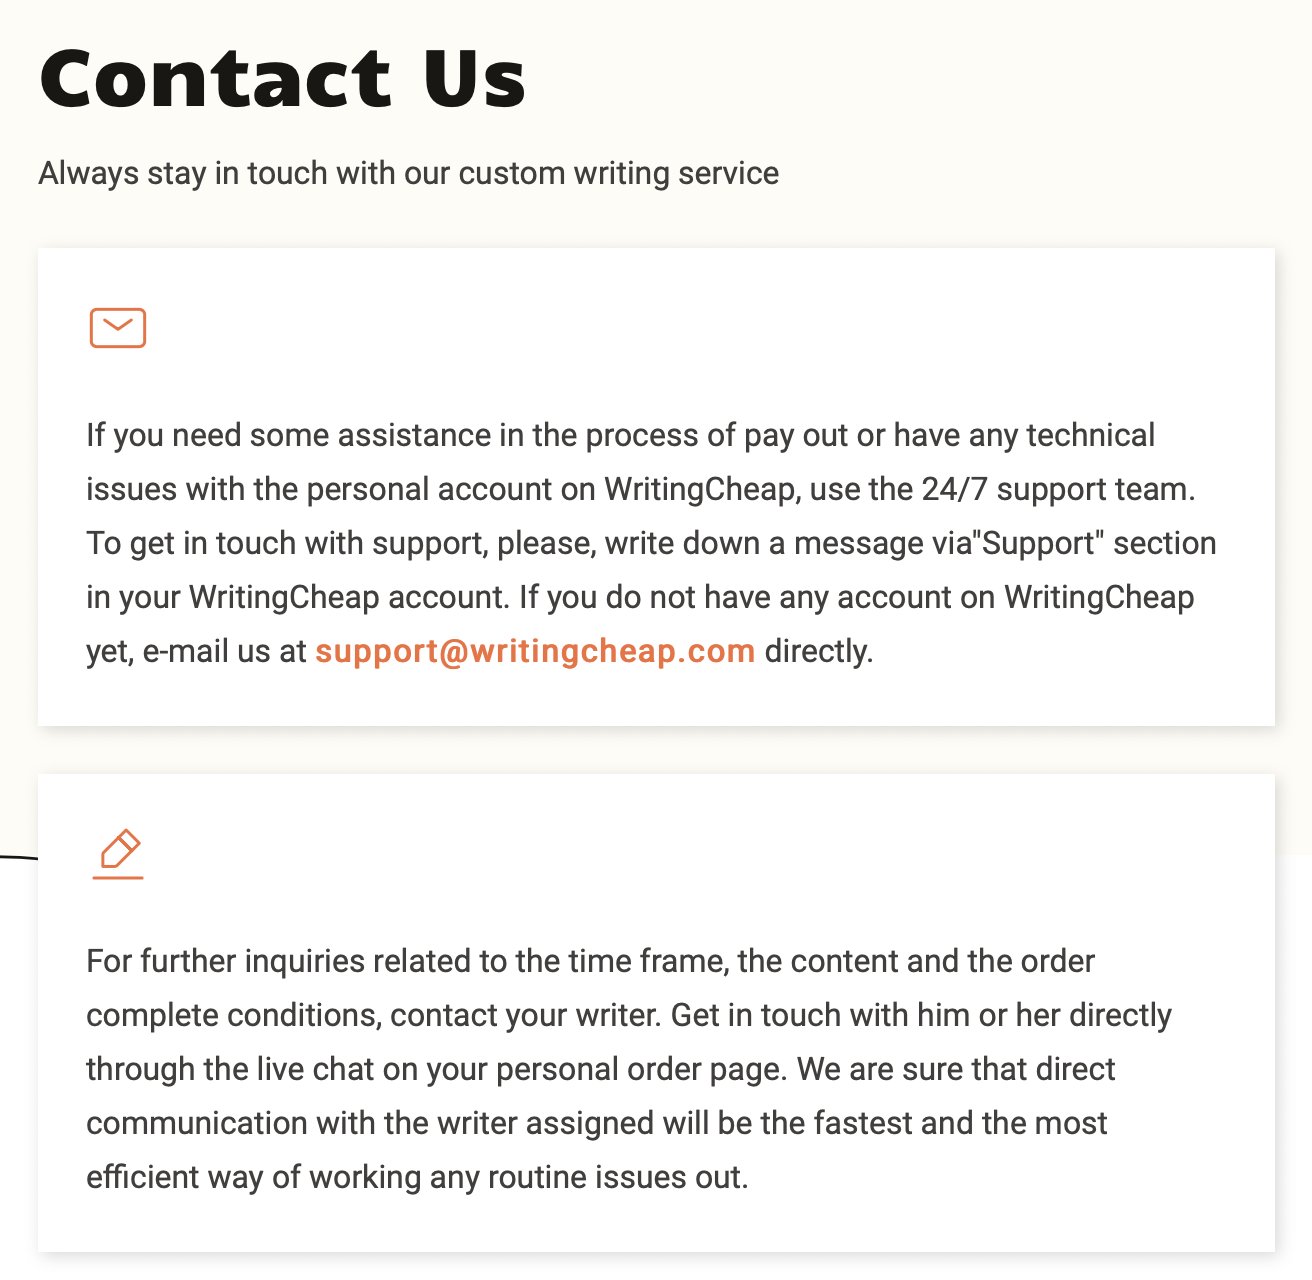 You can contact the customer support managers on Writingcheap.com via email or live chat.